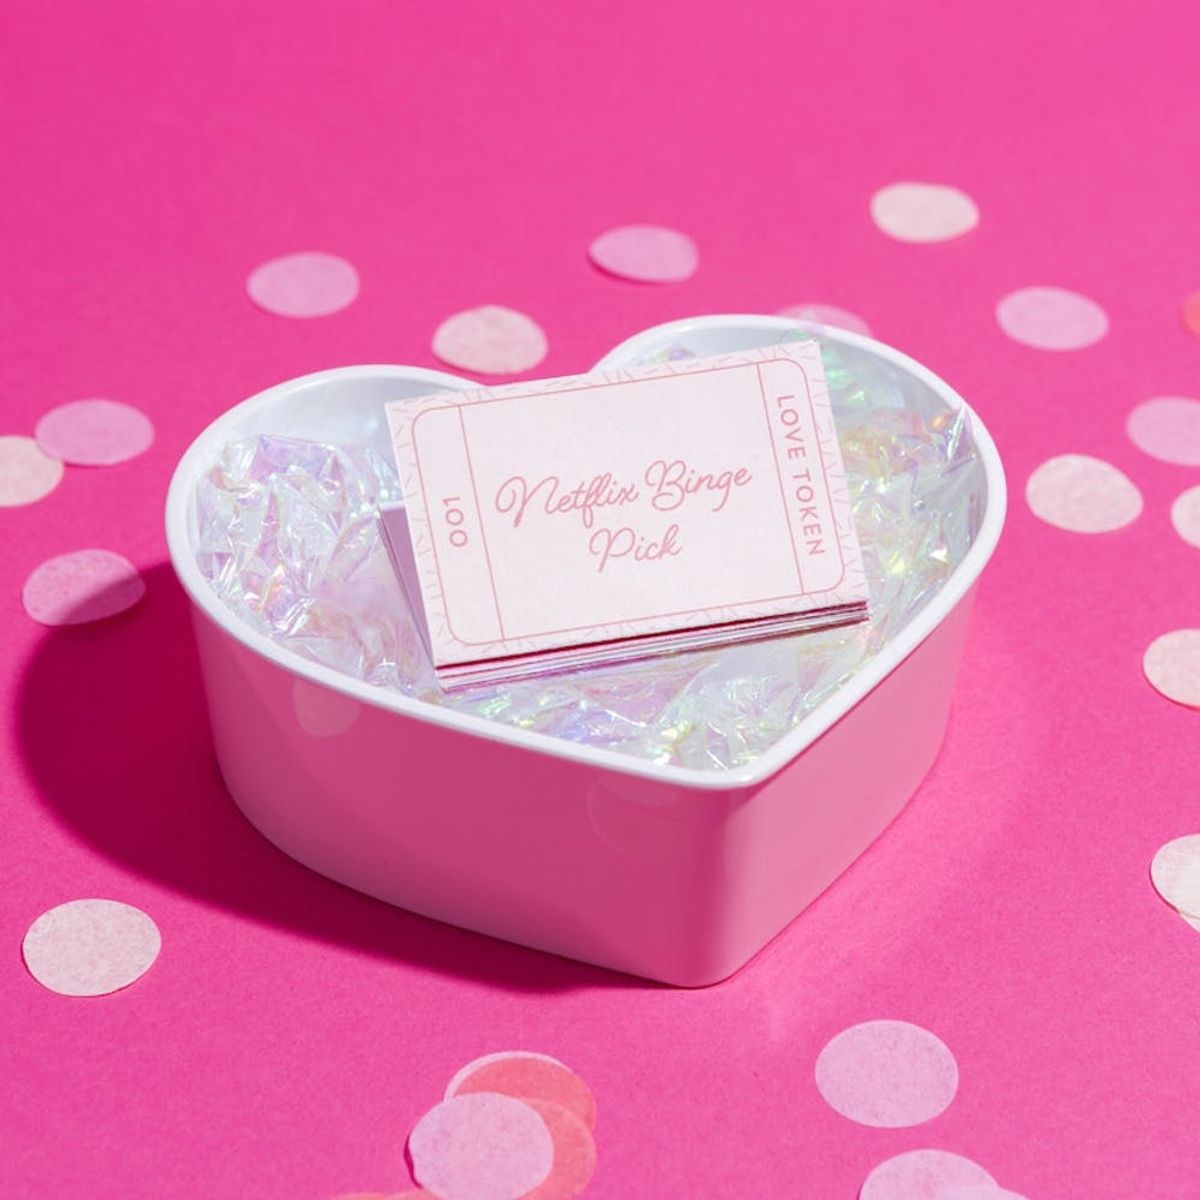 These Adorable Love Coupons Are the Perfect Last-Minute Valentine’s Day Gift